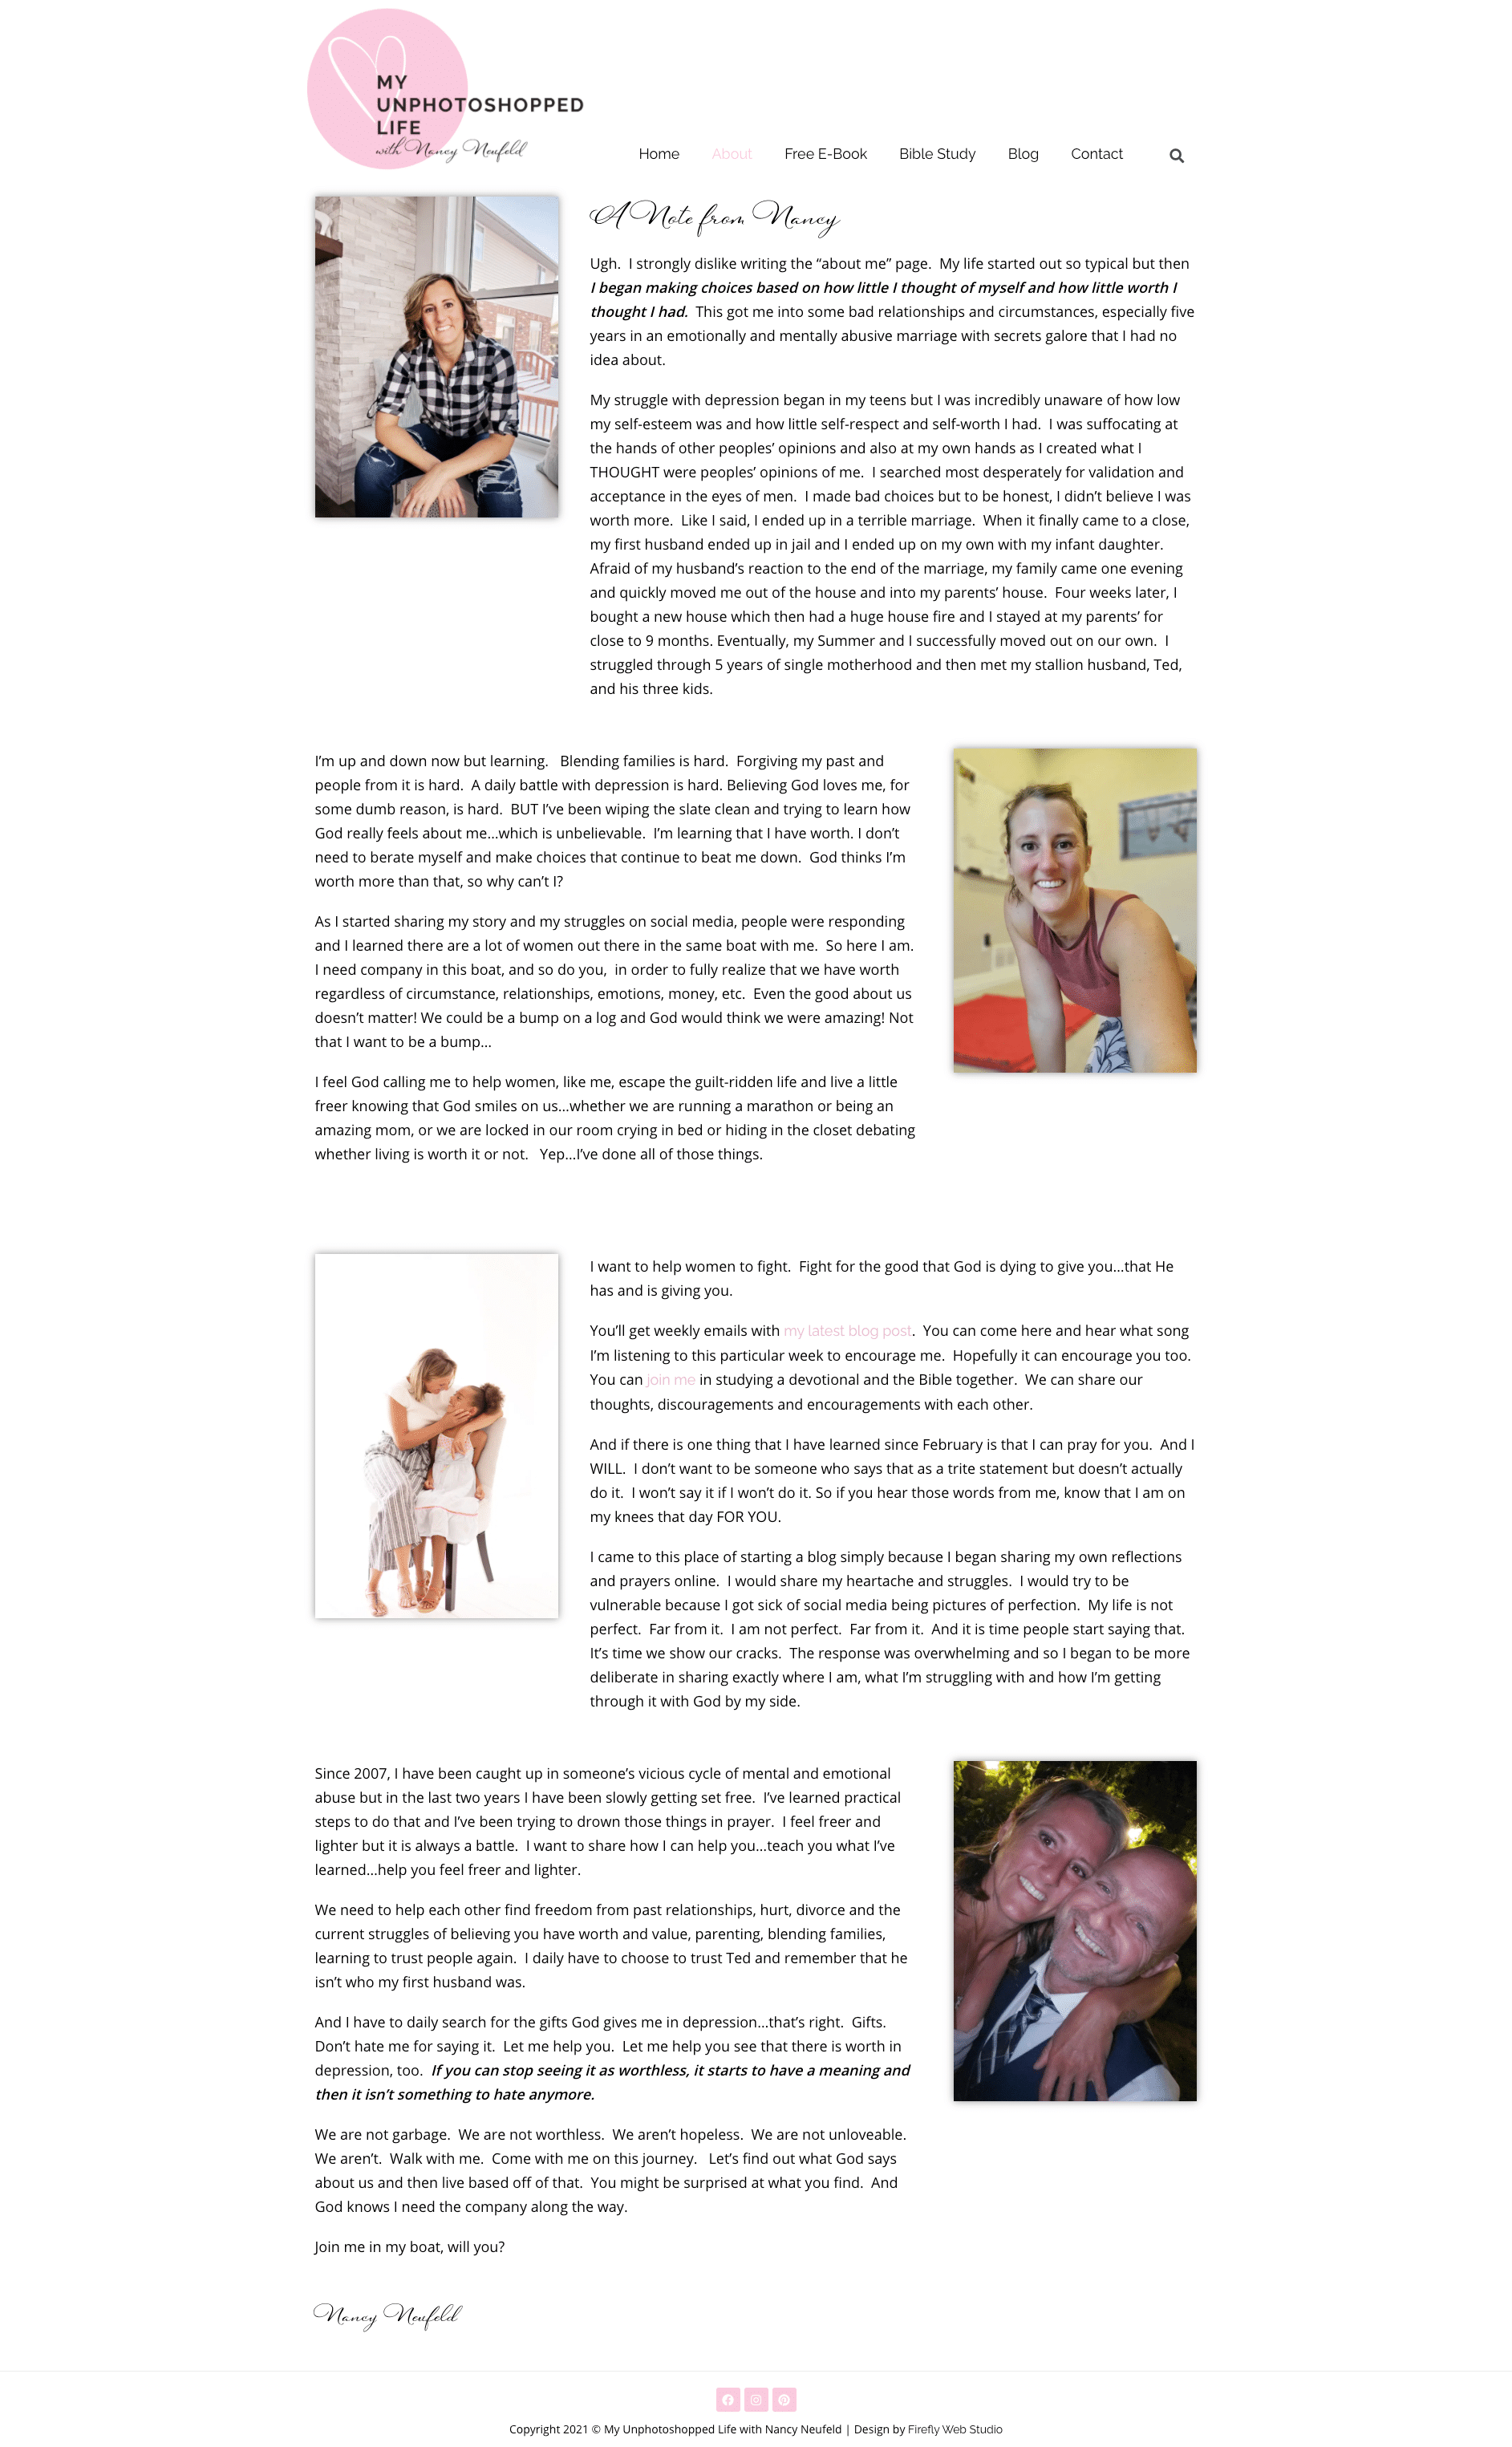 about page for my unphotoshoppedlife